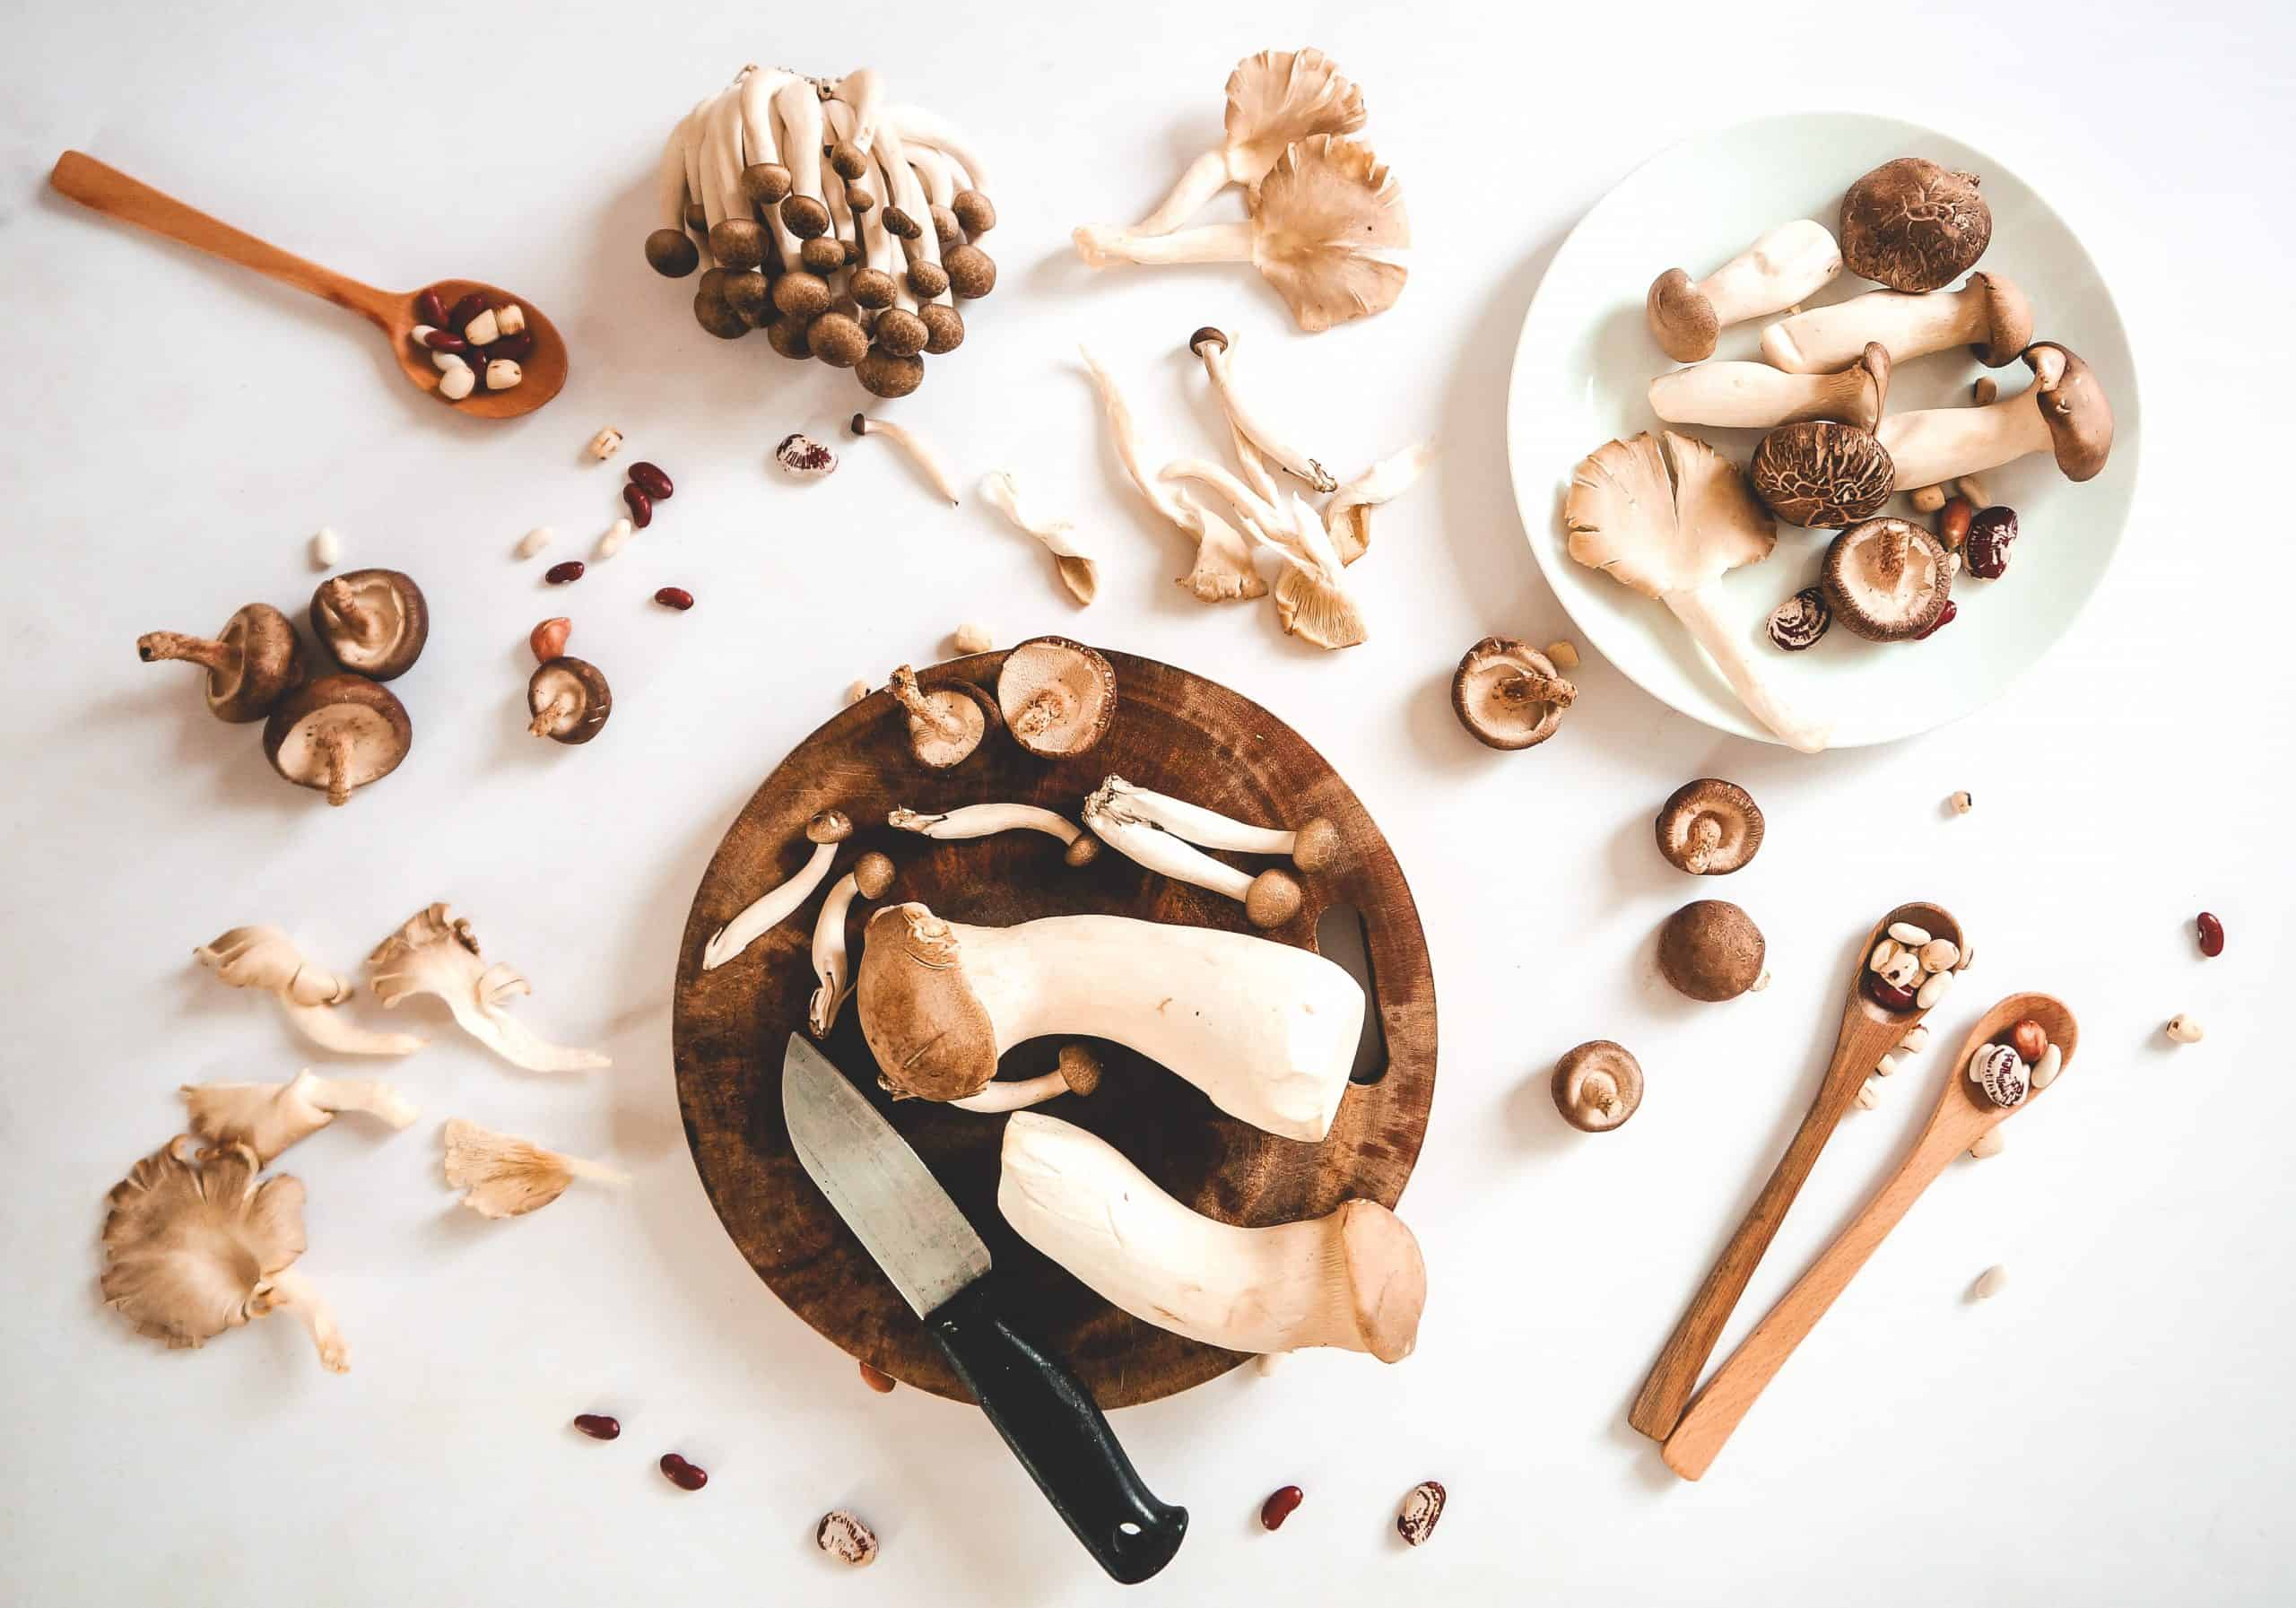 Mushrooms are a low-carb, high-fat food perfect for the keto diet. There are many different mushrooms, but some are better for the keto diet than others. This blog post will discuss the best mushrooms for a keto diet and why they are ideal. We will also provide some recipes that include these mushrooms so you can start incorporating them into your keto diet.